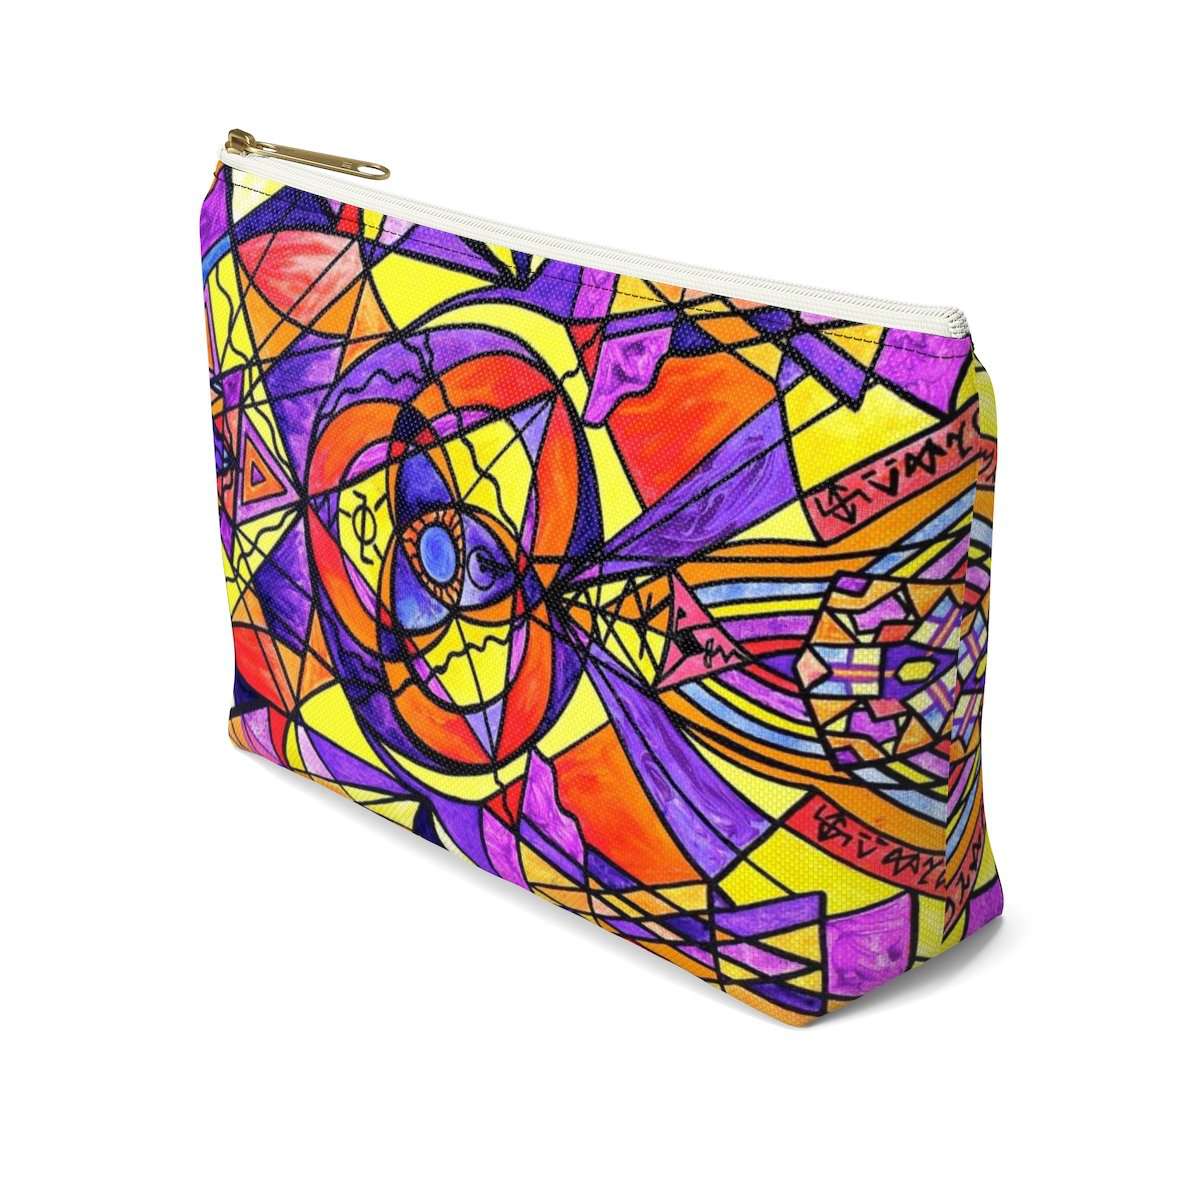 get-your-dream-of-the-destiny-grid-accessory-pouch-w-t-bottom-on-sale_2.jpg